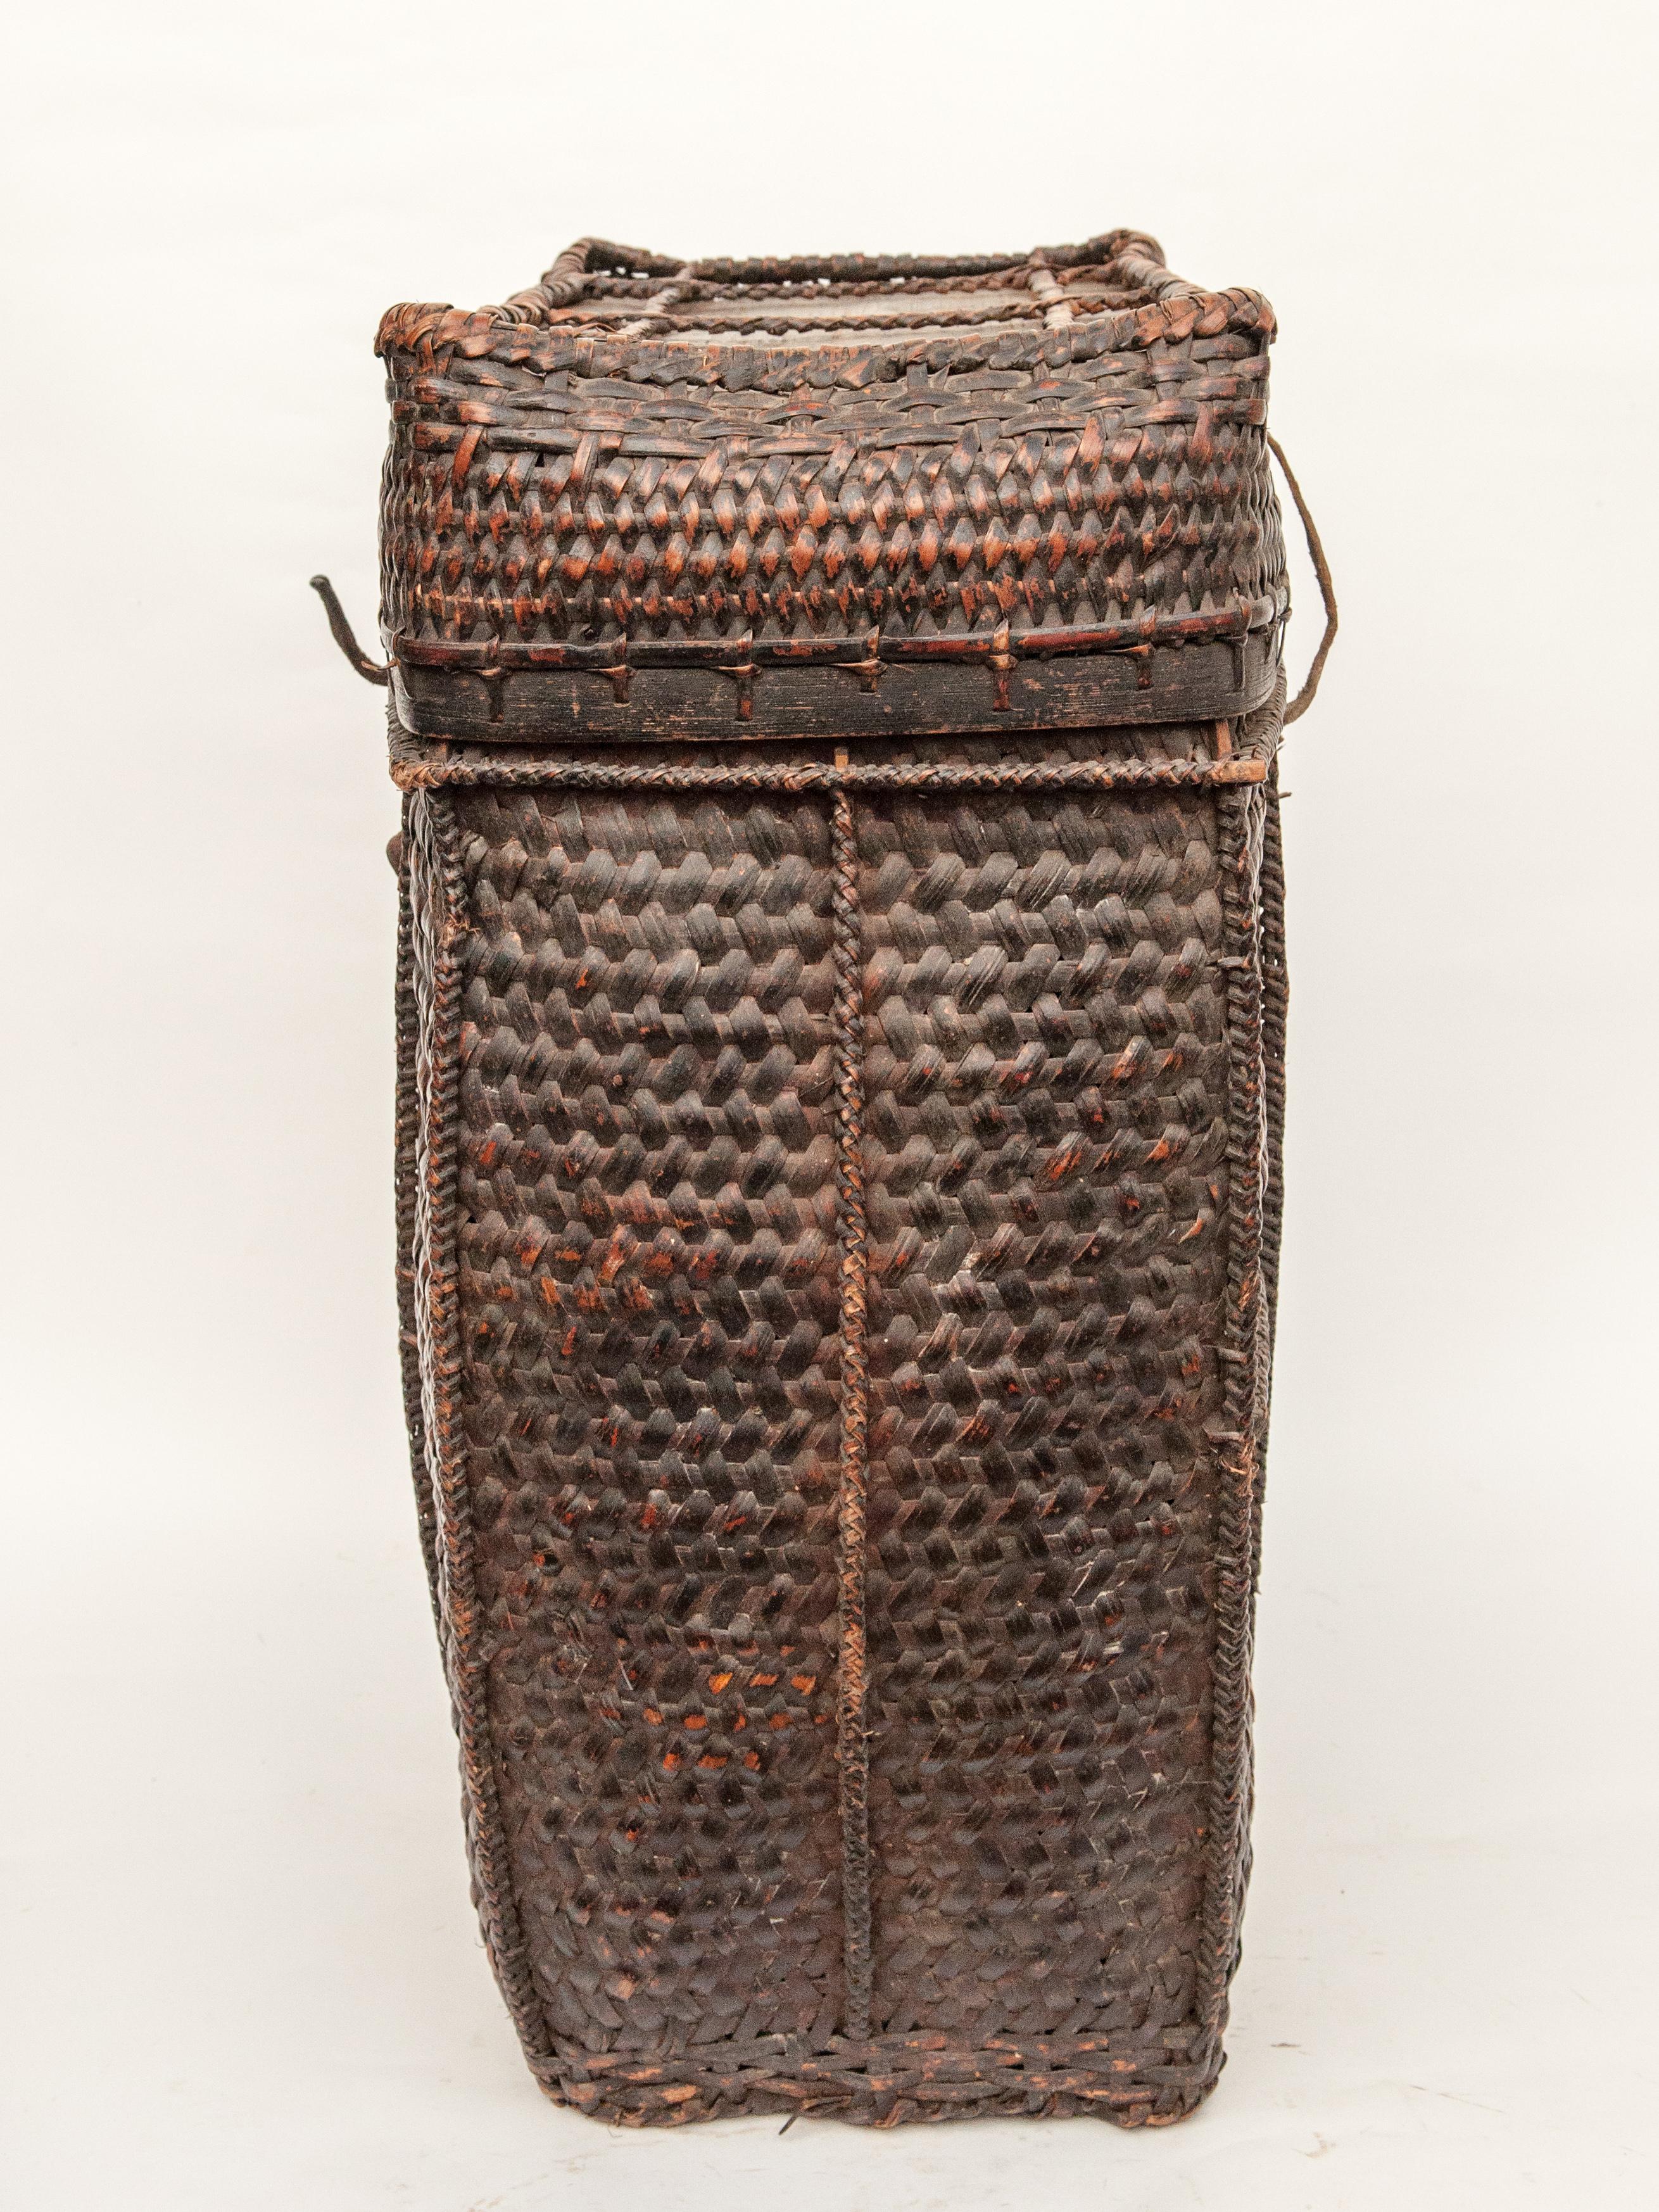 Hide Large Vintage Tribal Storage Basket with Lid from Bhutan, Mid-Late 20th Century